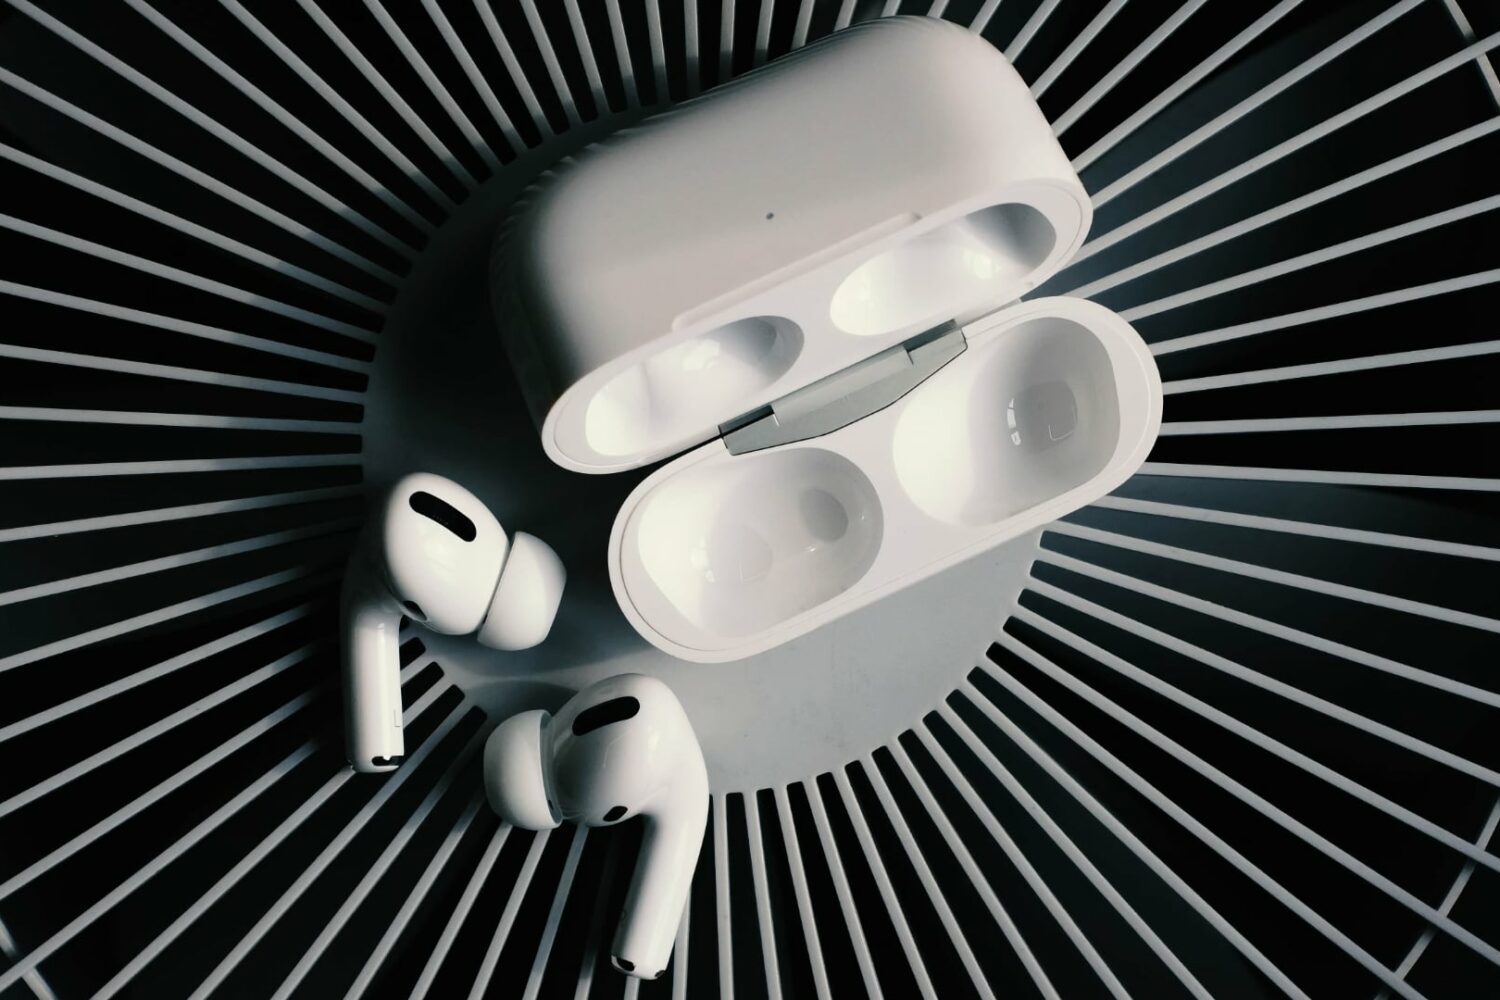 AirPods Pro outside their charging case with the lid open